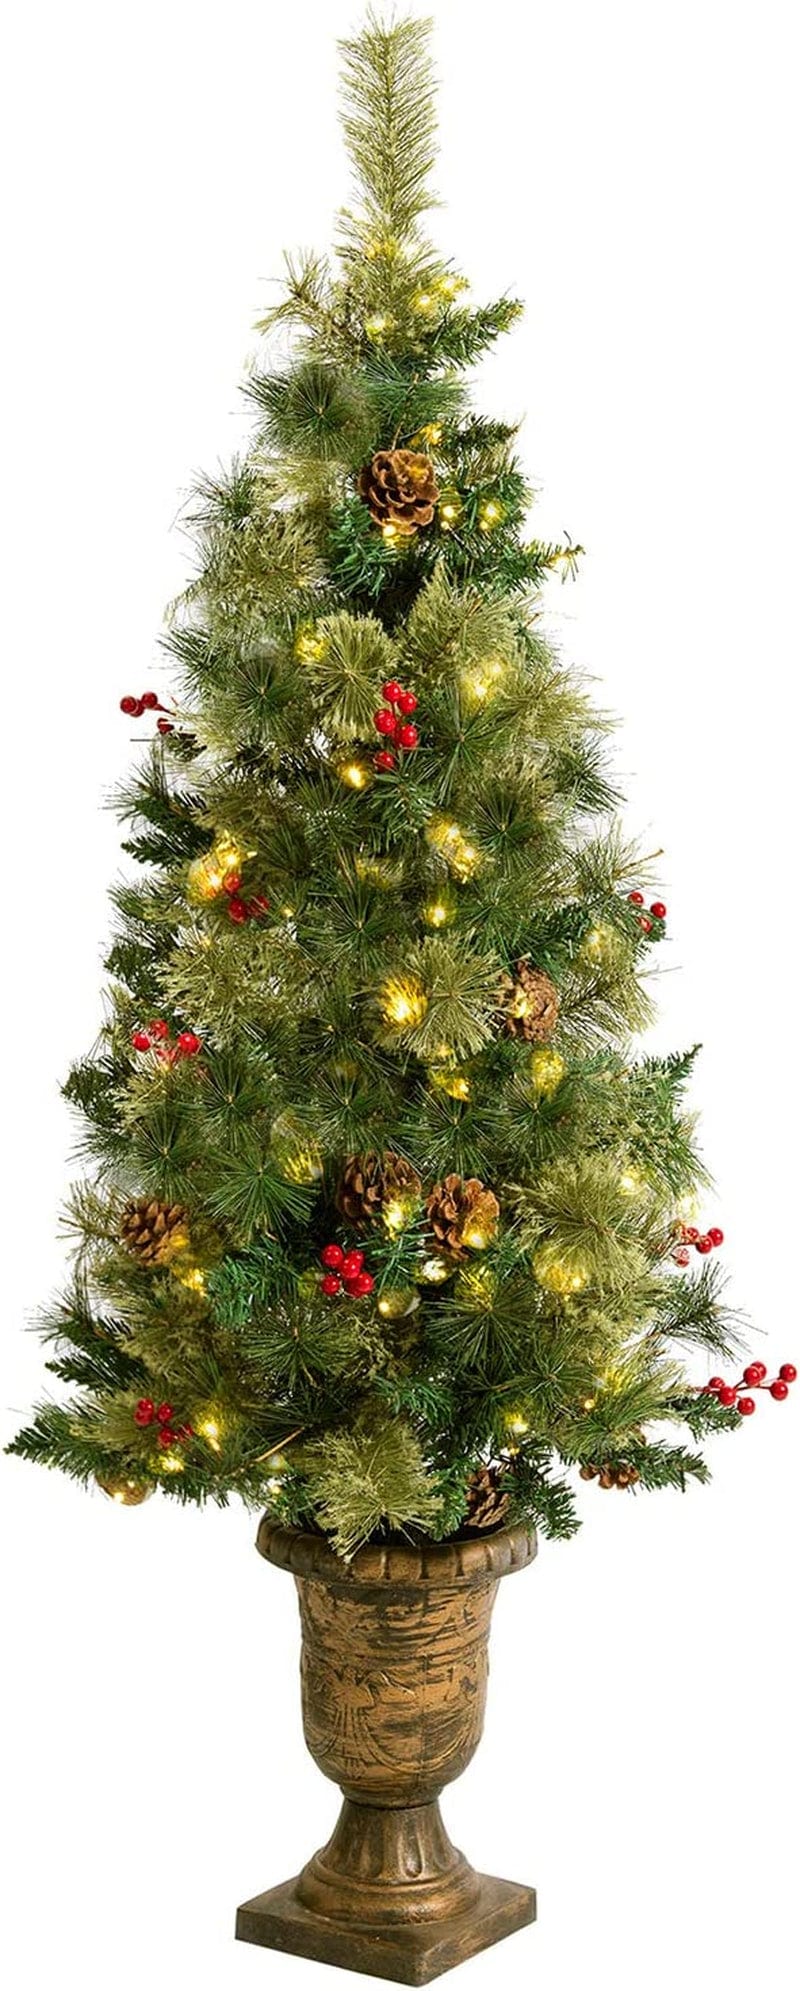 ASTEROUTDOOR Prelit Artificial Christmas Tree with Lights, Full Lifelike Shape Lush Branches Includes Pre-Strung White Lights Carolina Pine Spruce - 7.5 Ft Tall, US Based, Green Sporting Goods > Outdoor Recreation > Winter Sports & Activities YunMengYunXi 4ft green  